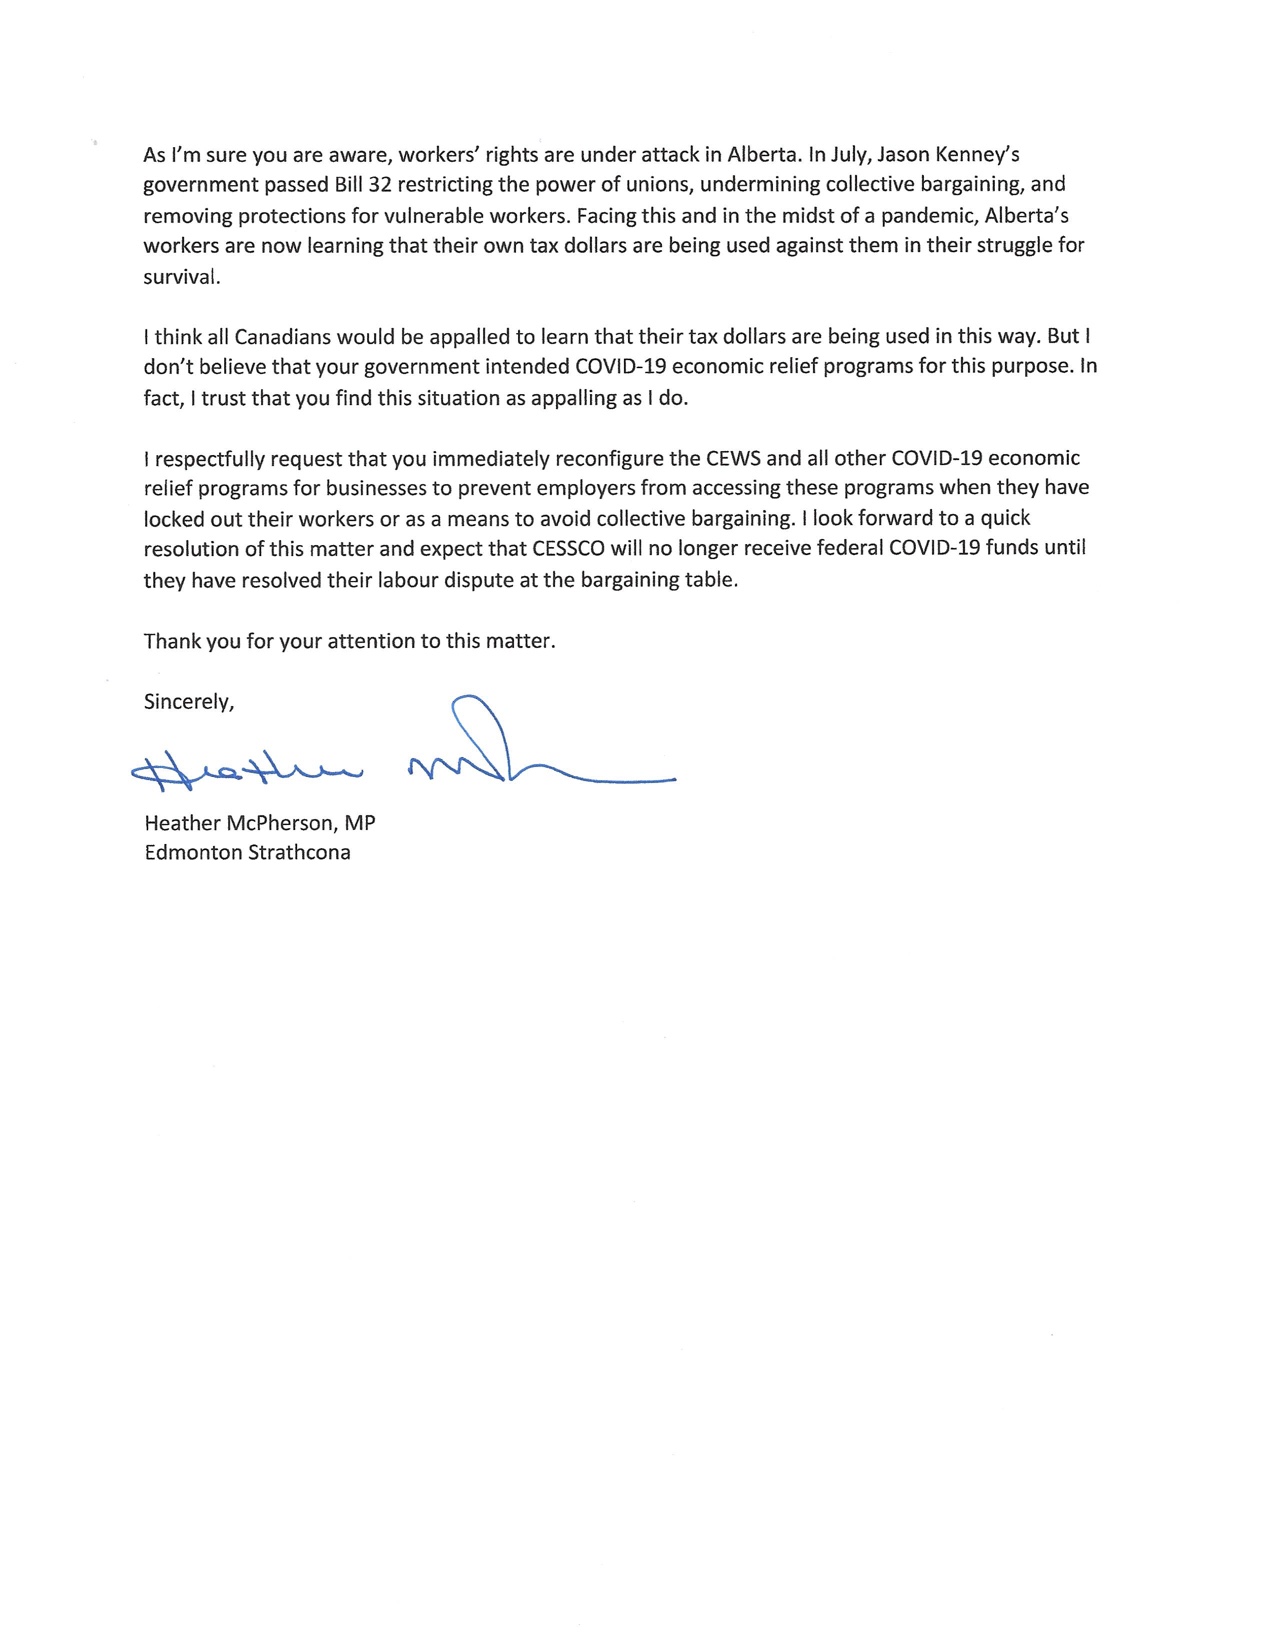 Letter to Minister Freeland, page 2